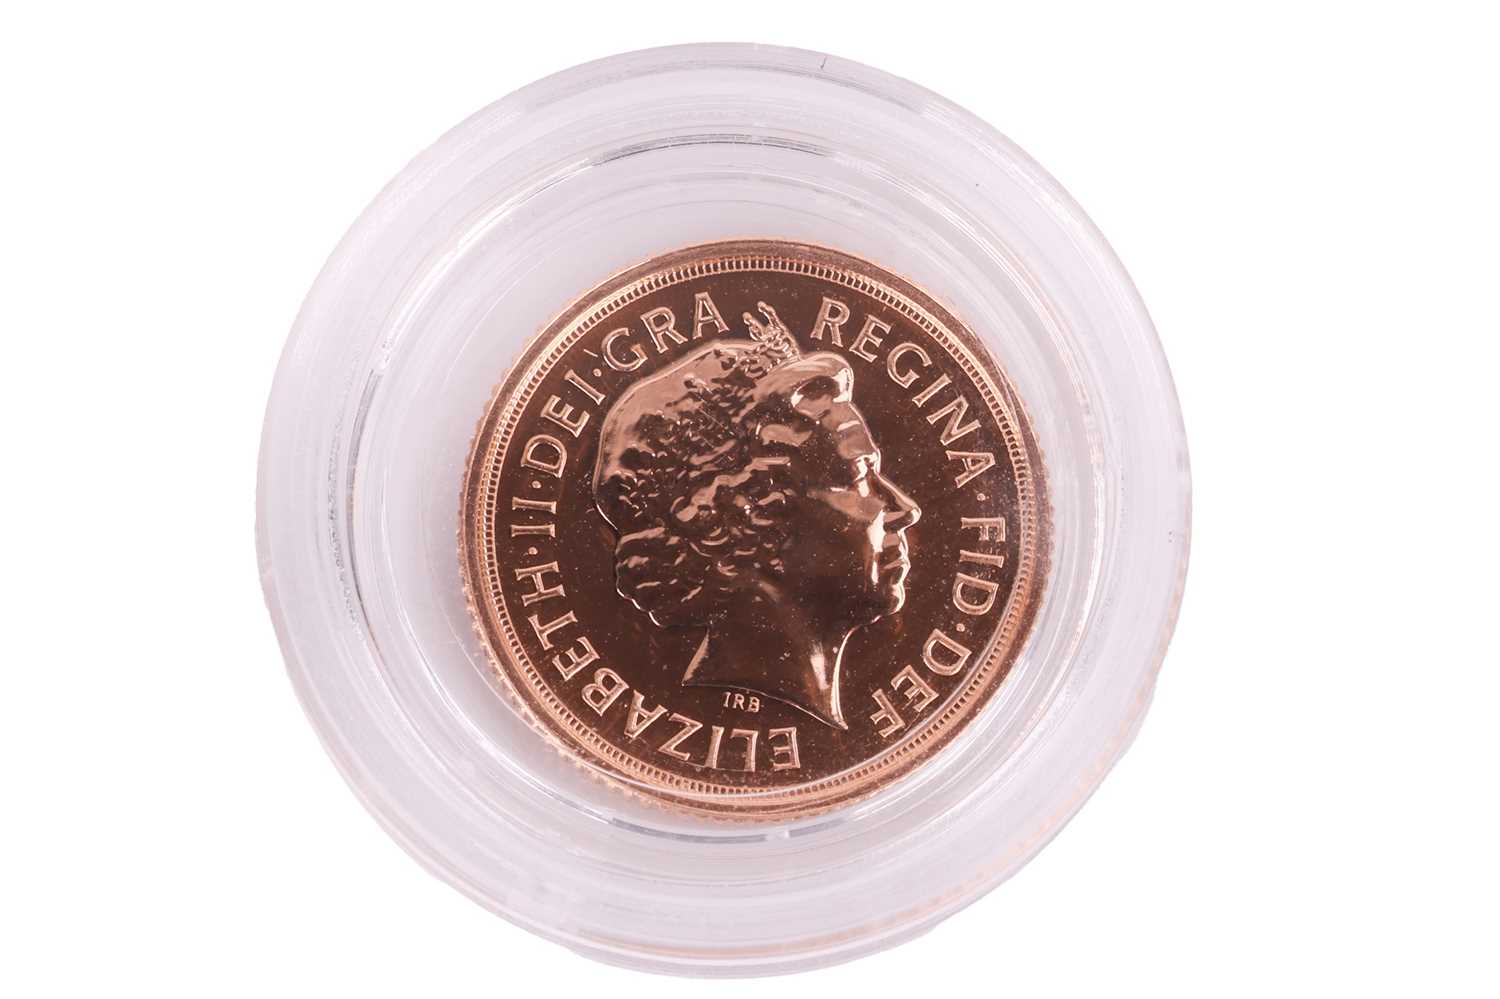 A 2012 Elizabeth 1/4 gold sovereign celebrating the Diamond Jubilee and features a modern interpreta - Image 2 of 2